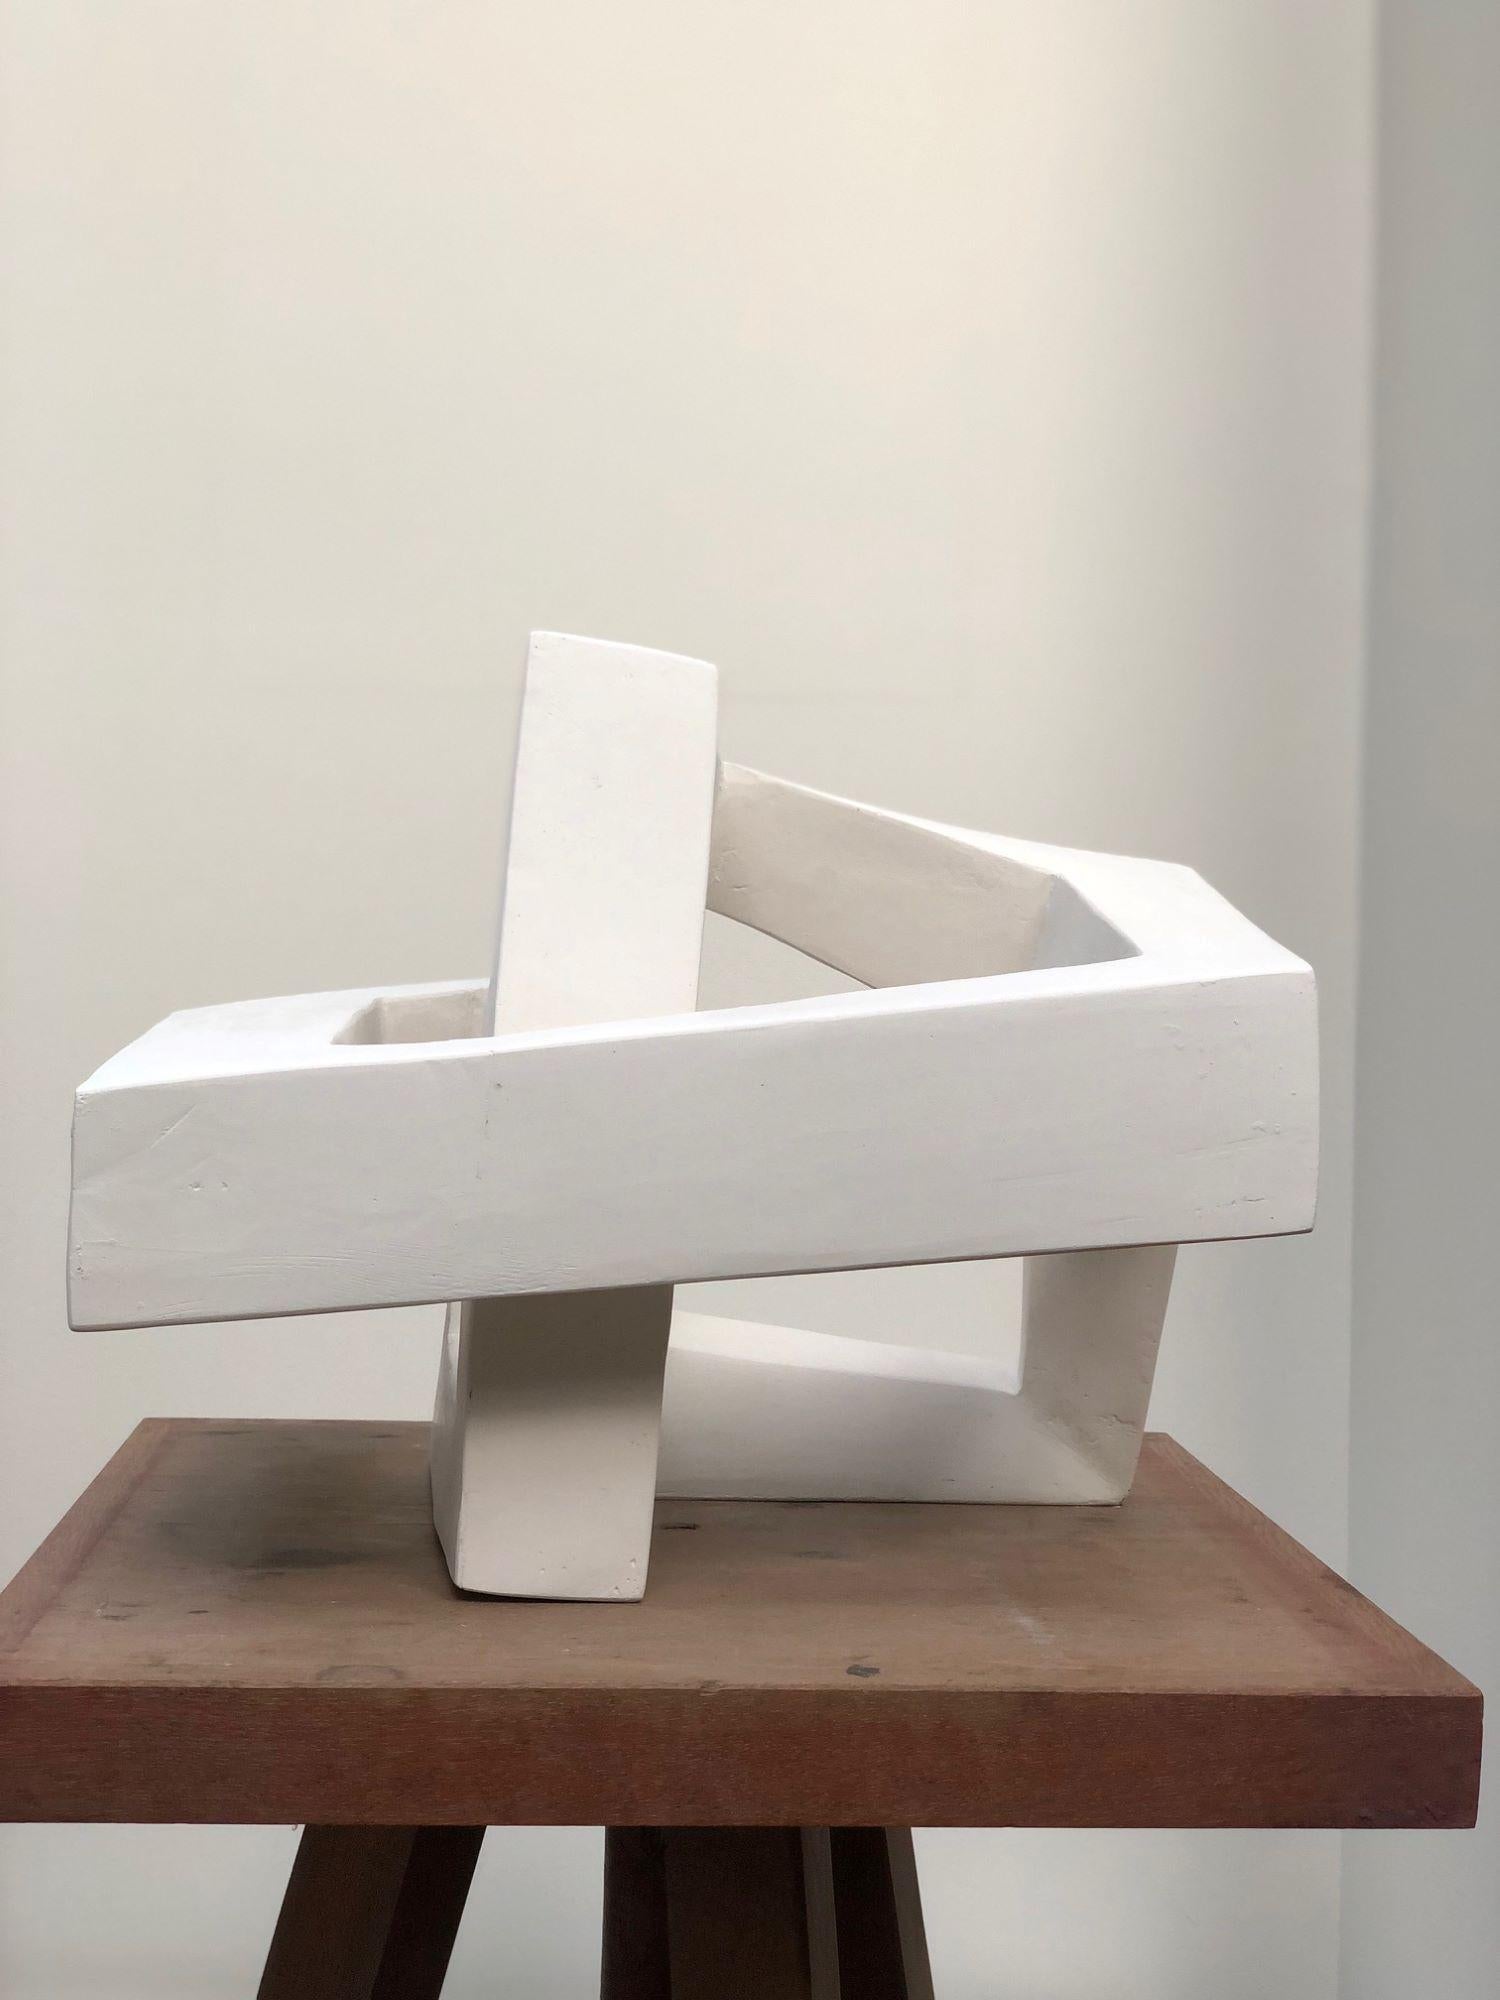 Arch by Delphine Brabant - Abstract geometric plaster sculpture For Sale 3